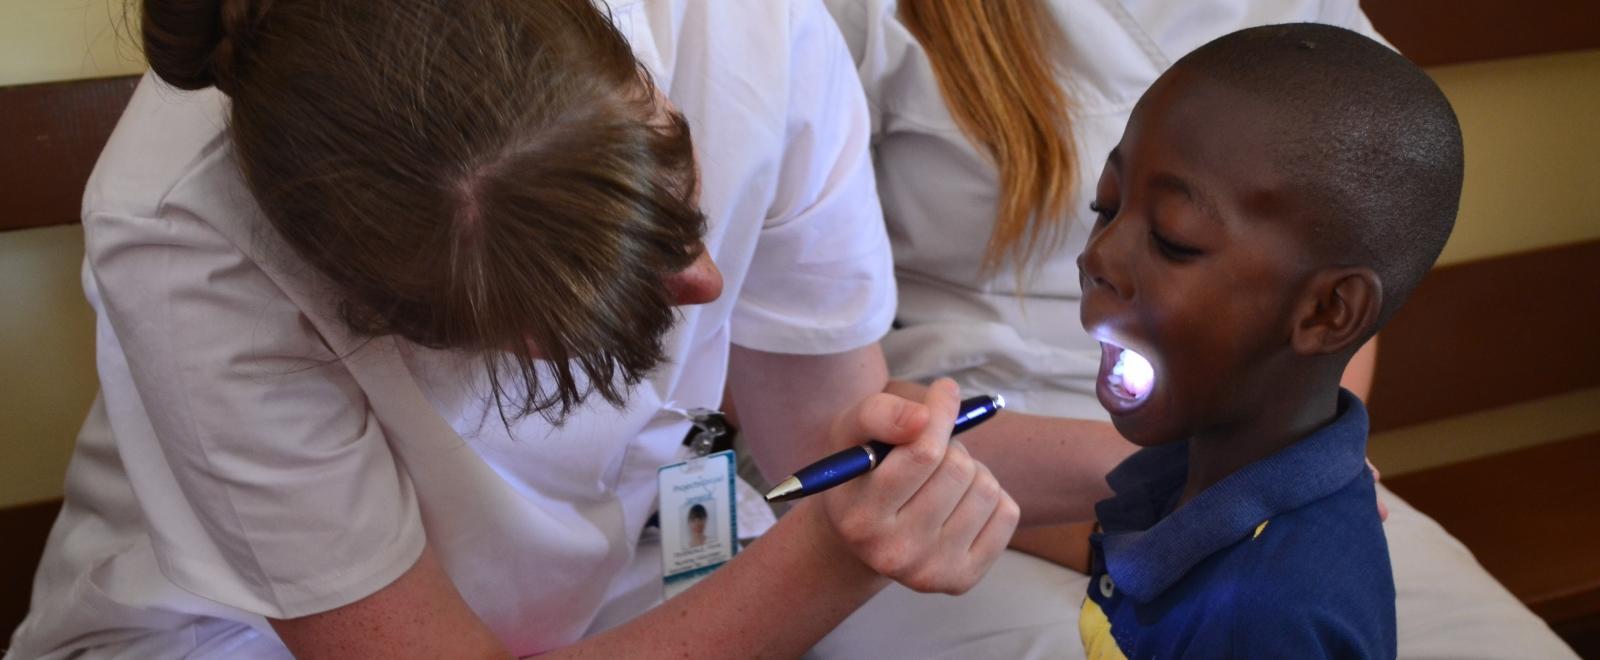 Female medical intern examines a young boy's mouth in a care centre during a medical internship in Jamaica.